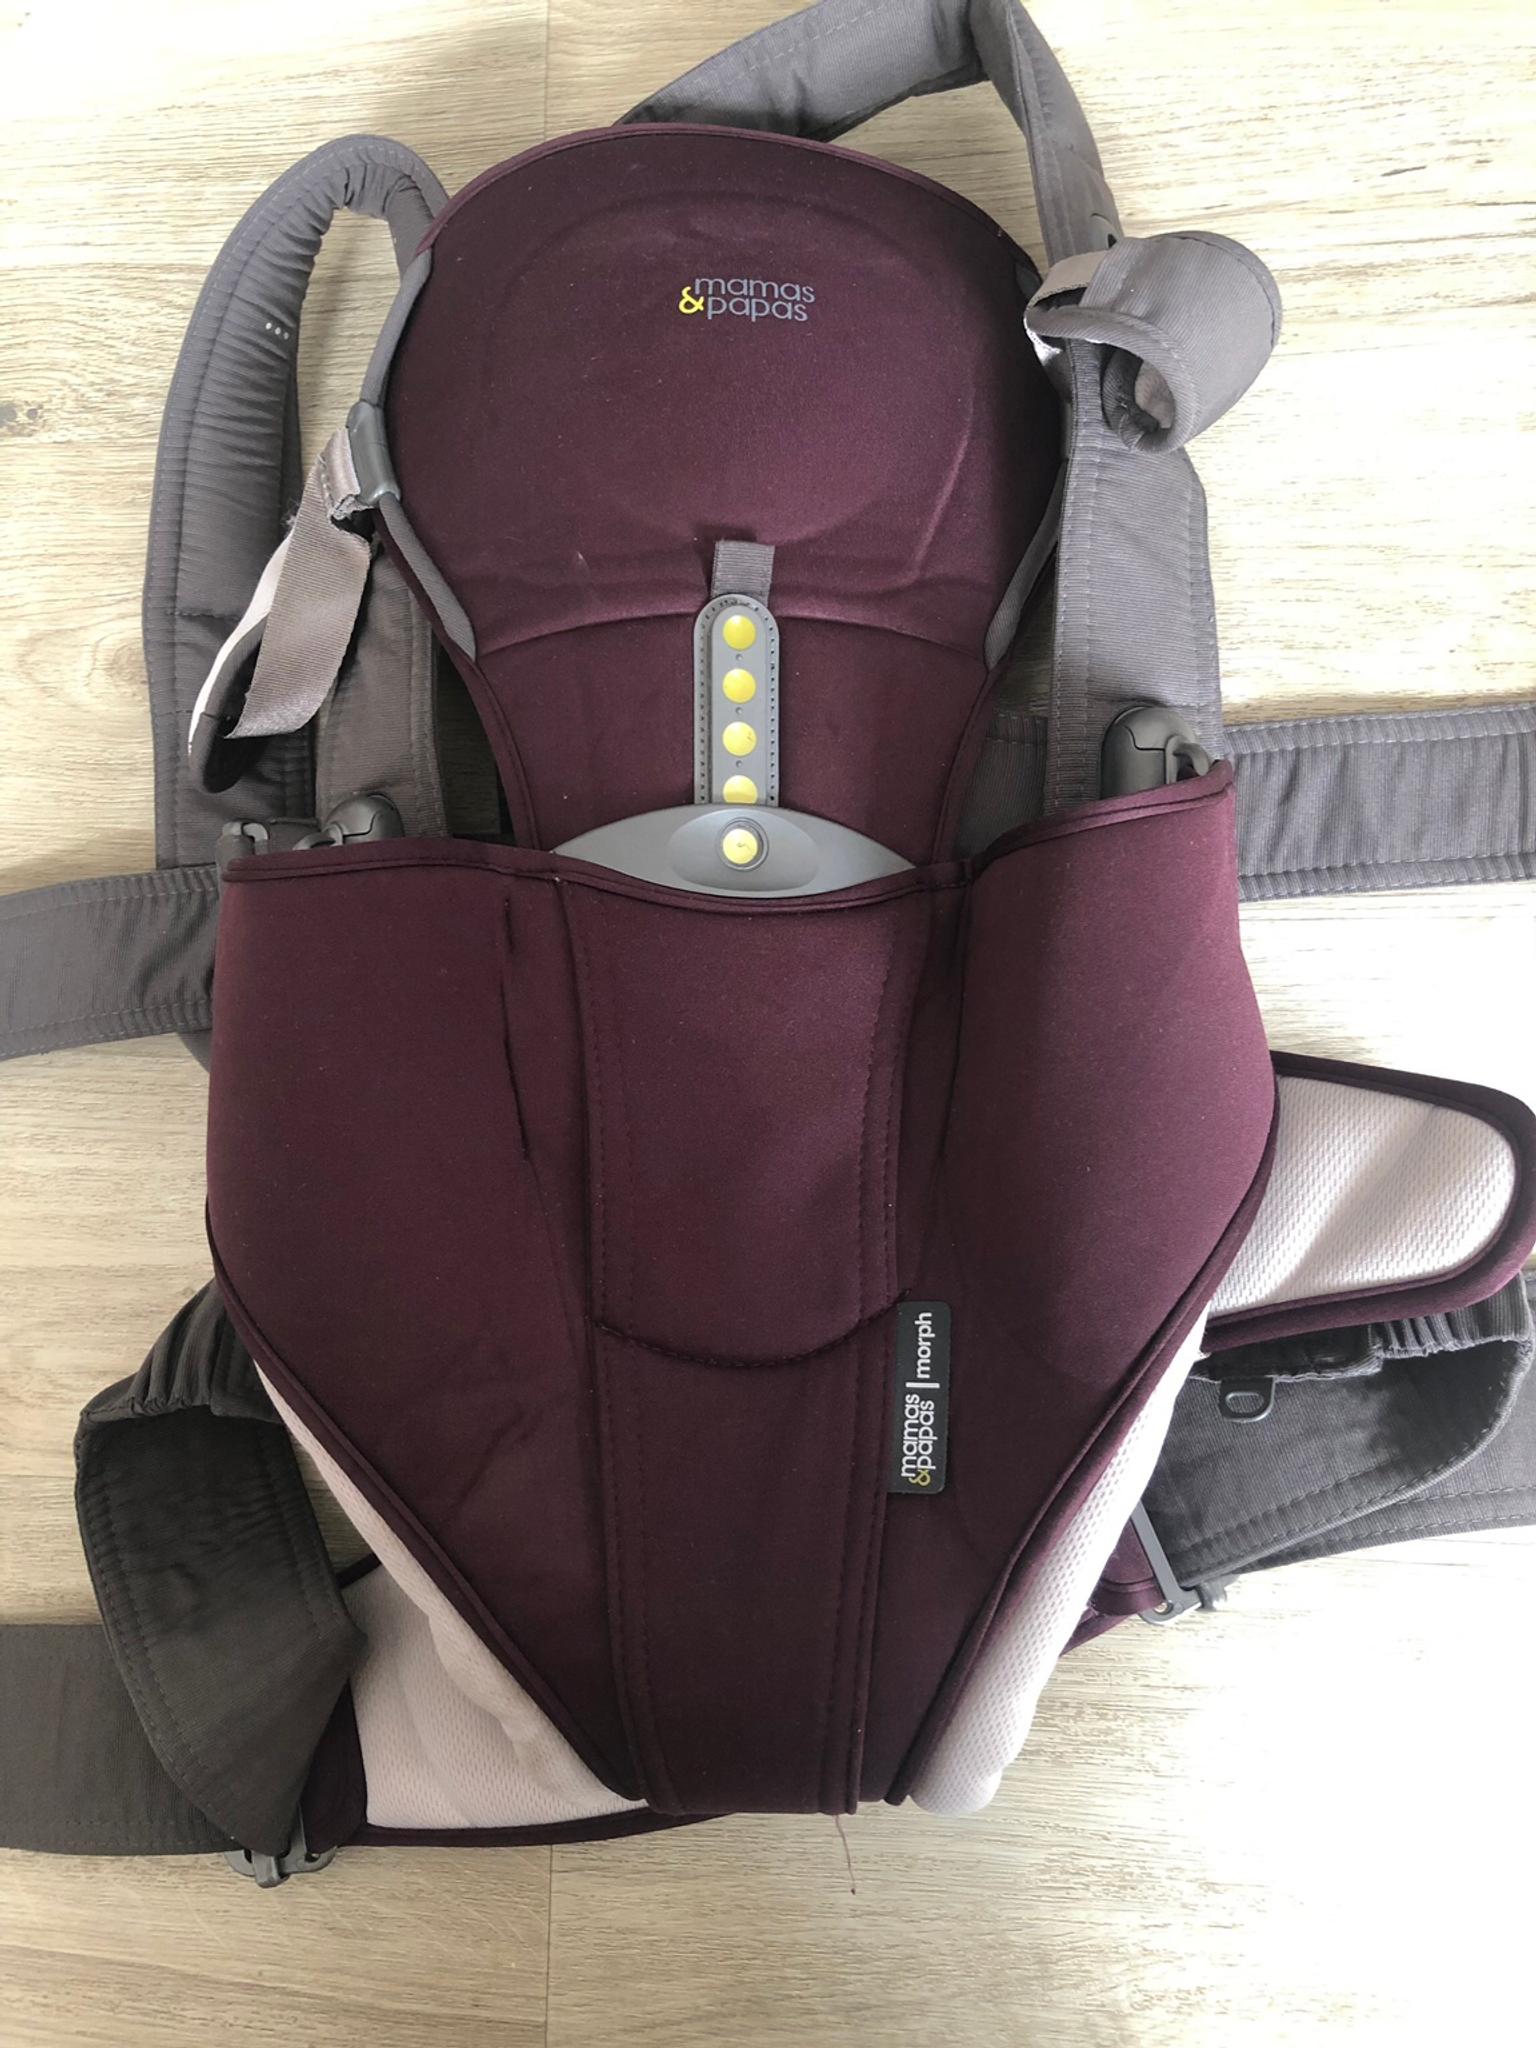 mamas and papas morph baby carrier